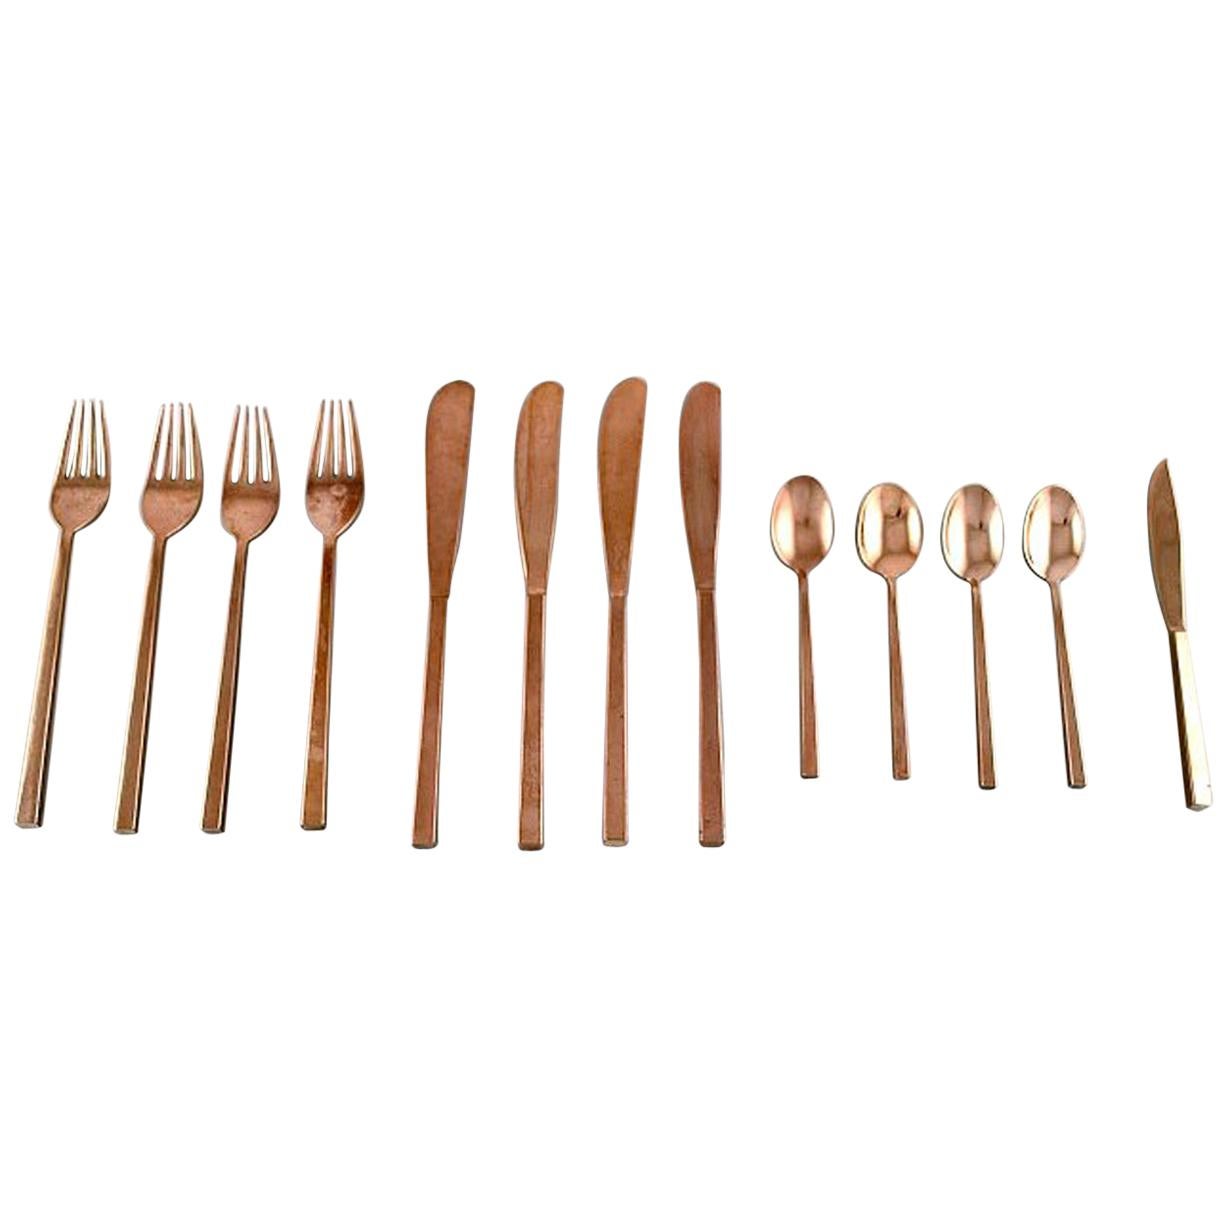 Sigvard Bernadotte 'Scanline' Cutlery in Brass Complete for 4 P